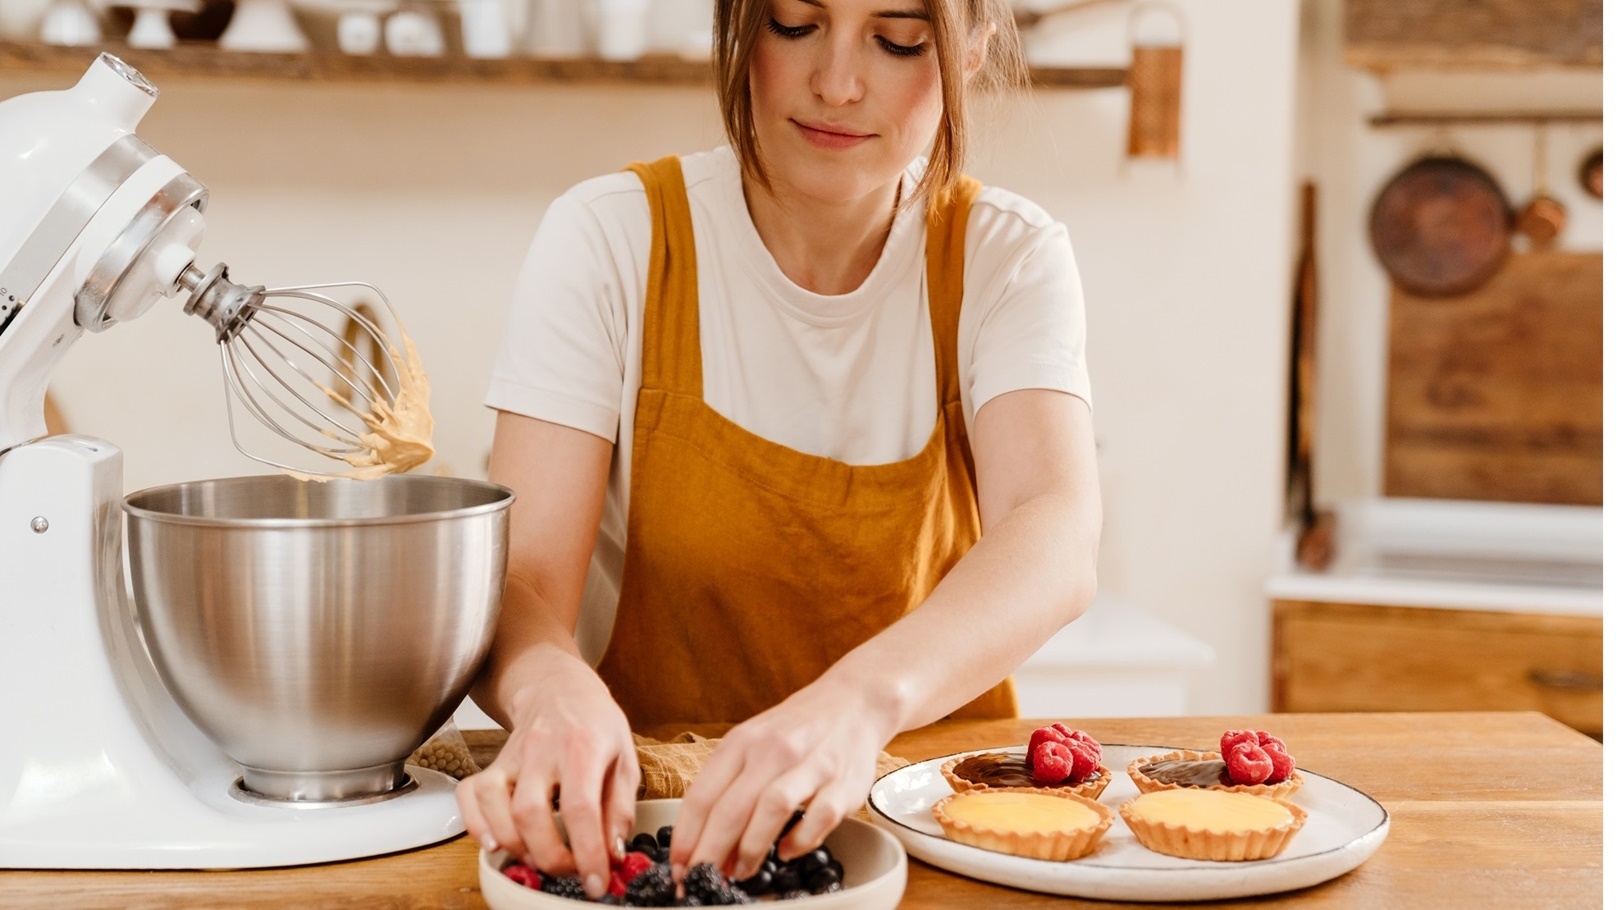 beautiful-concentrated-pastry-chef-woman-making-ta-2022-02-01-22-36-35-utc